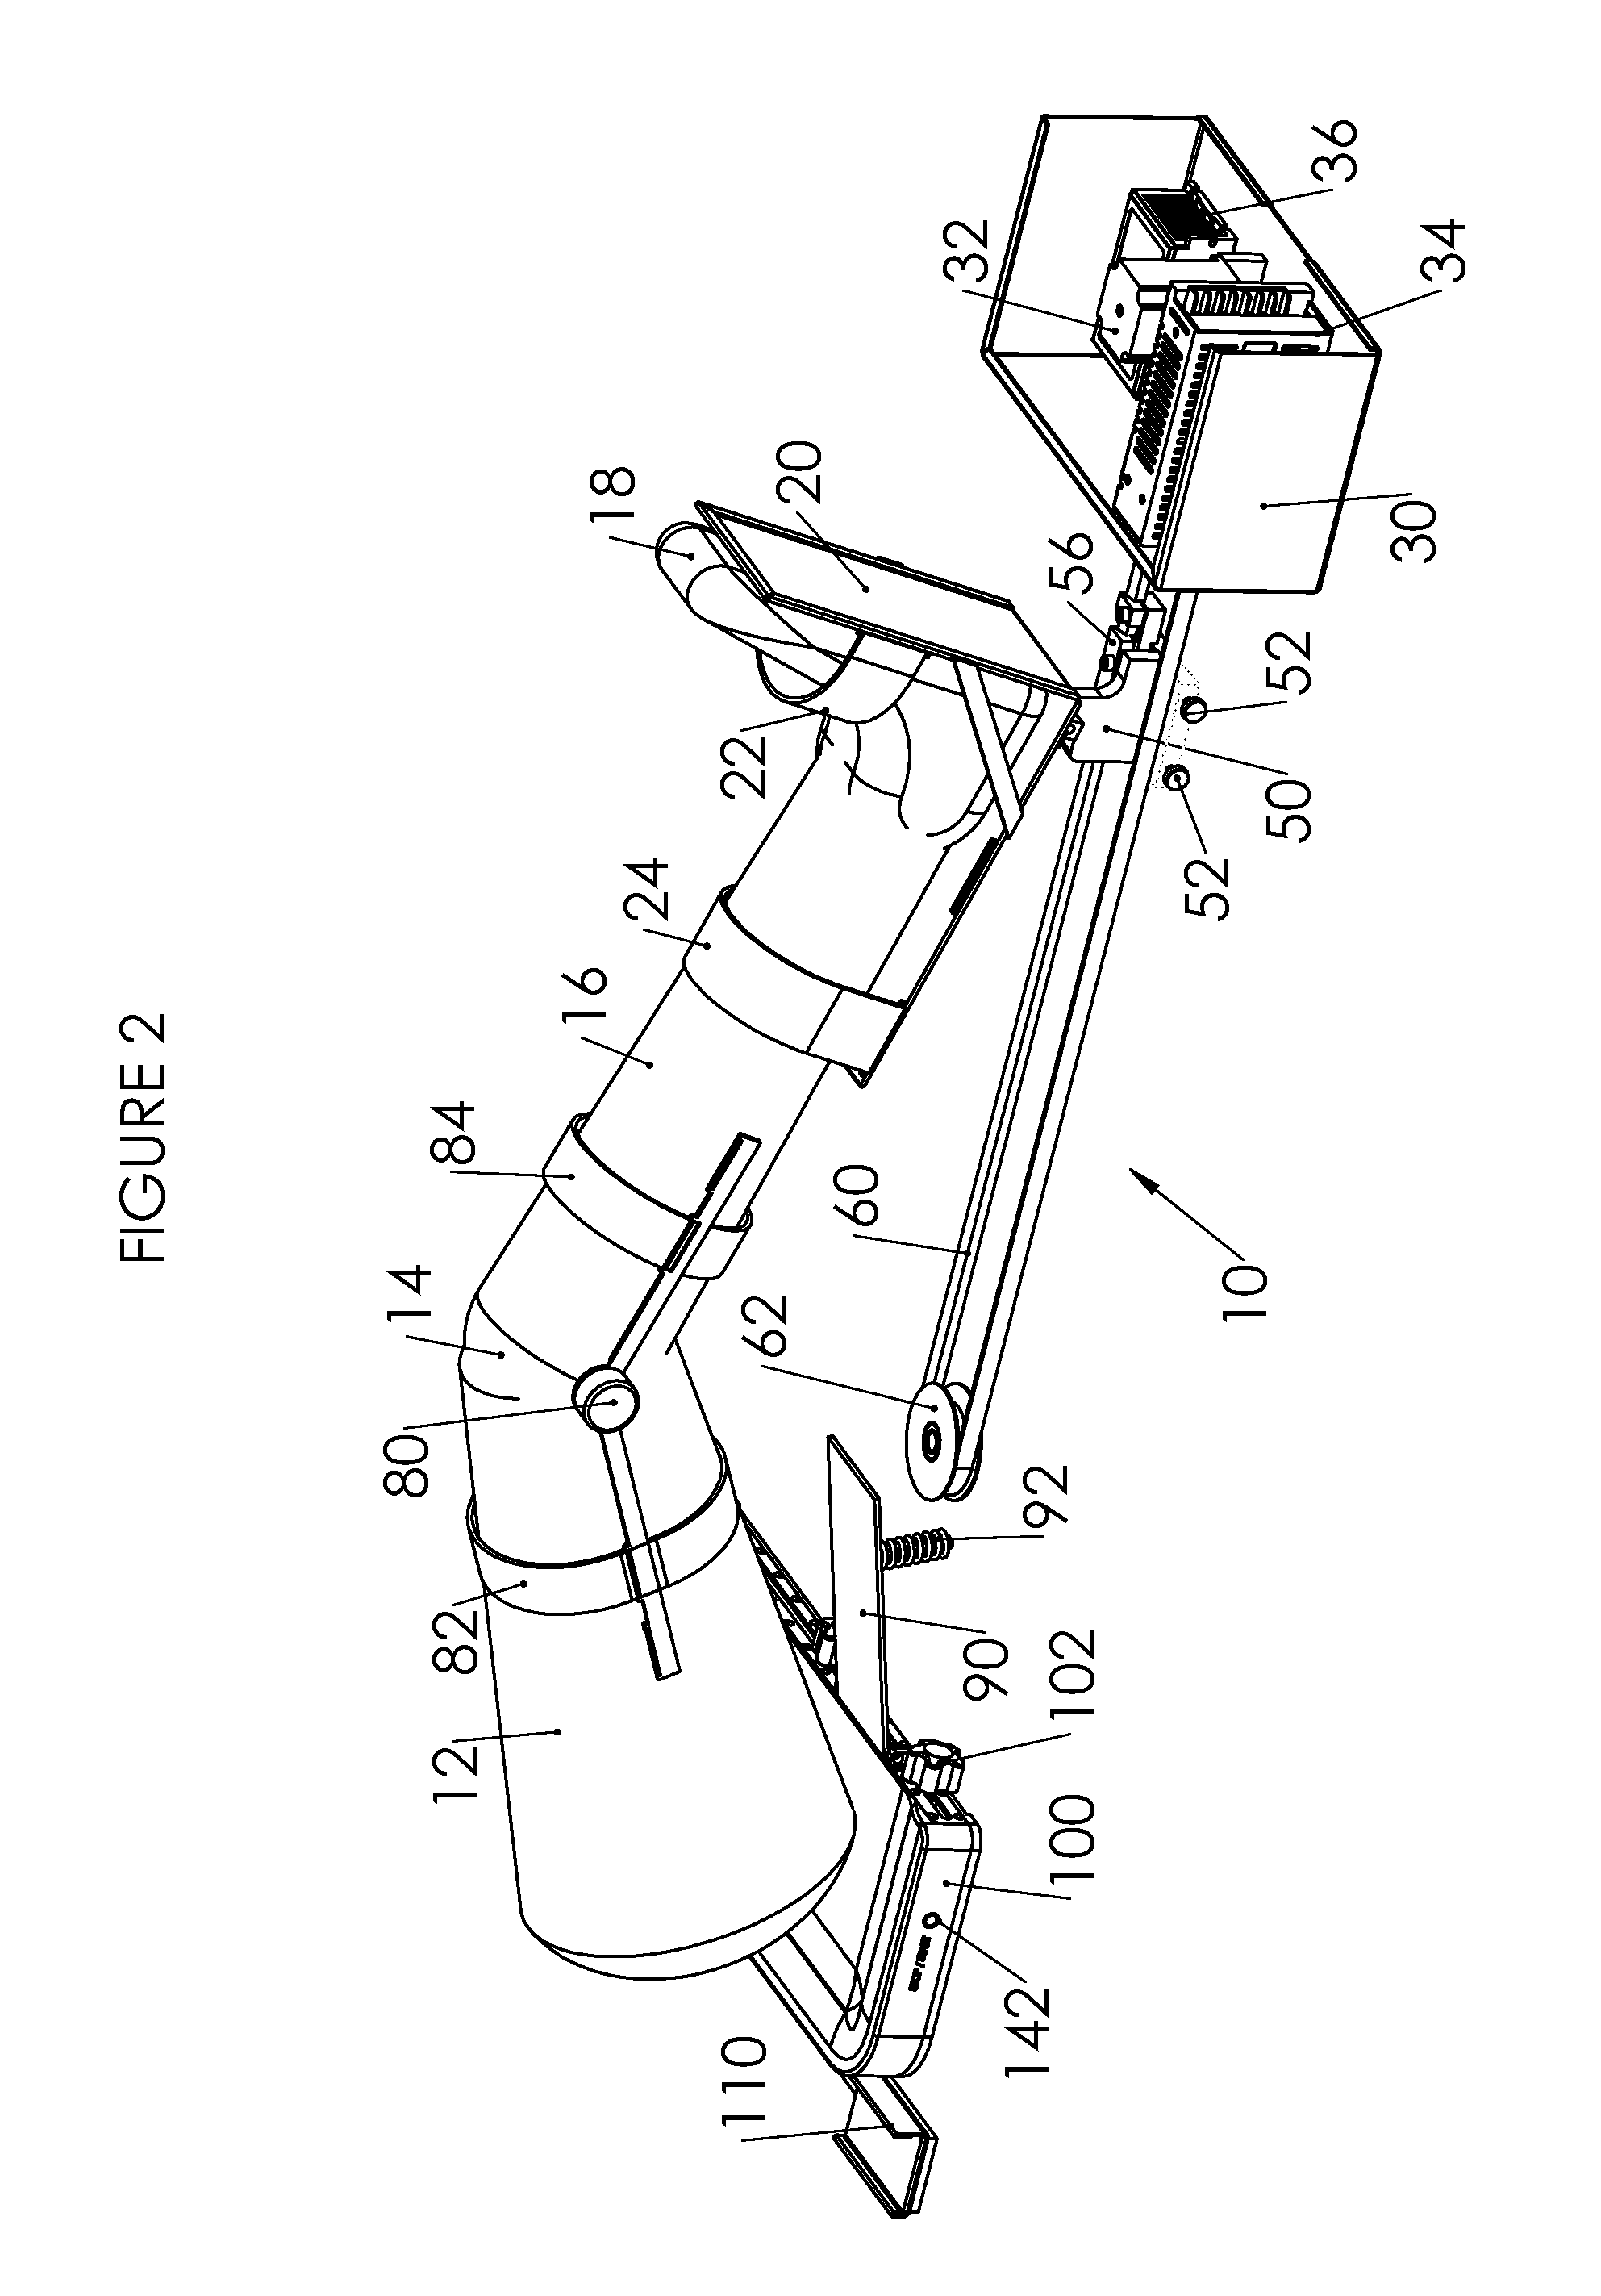 Device and Method for Knee Rehabilitation